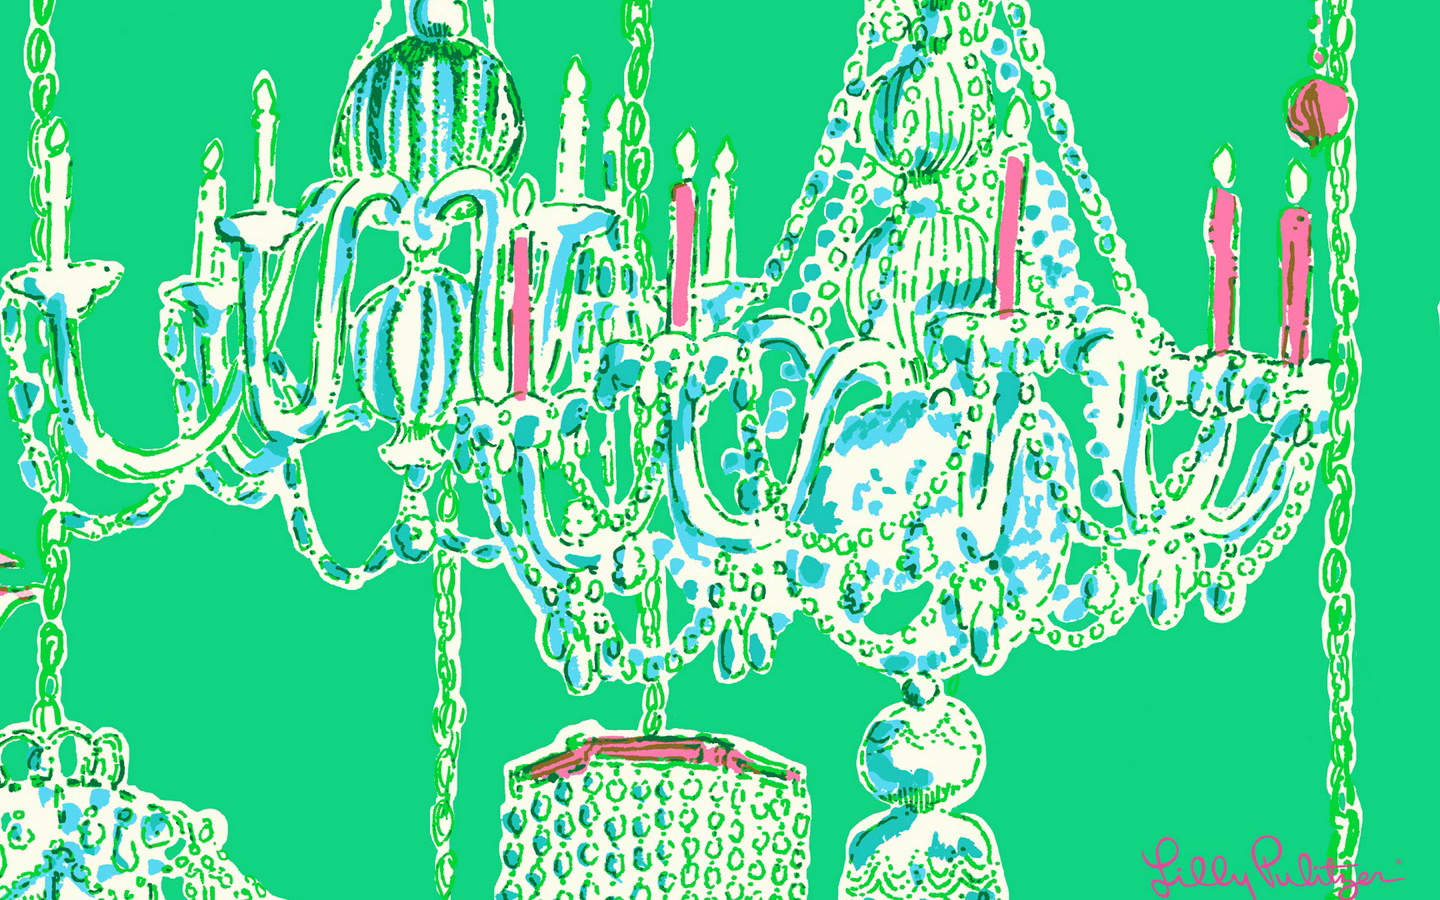 Lilly Pulitzer Daughters, Lilly Pulitzer, Lilly Pulitzer Design, Lilly Pulitzer Fashion, Lilly Pulitzer Print, WM Events, William Fogler, Corporate Event Planning, Event Design, Event Planning, Wedding Planning, Social Event Planning, Colorful Event Design, Chandelier Print